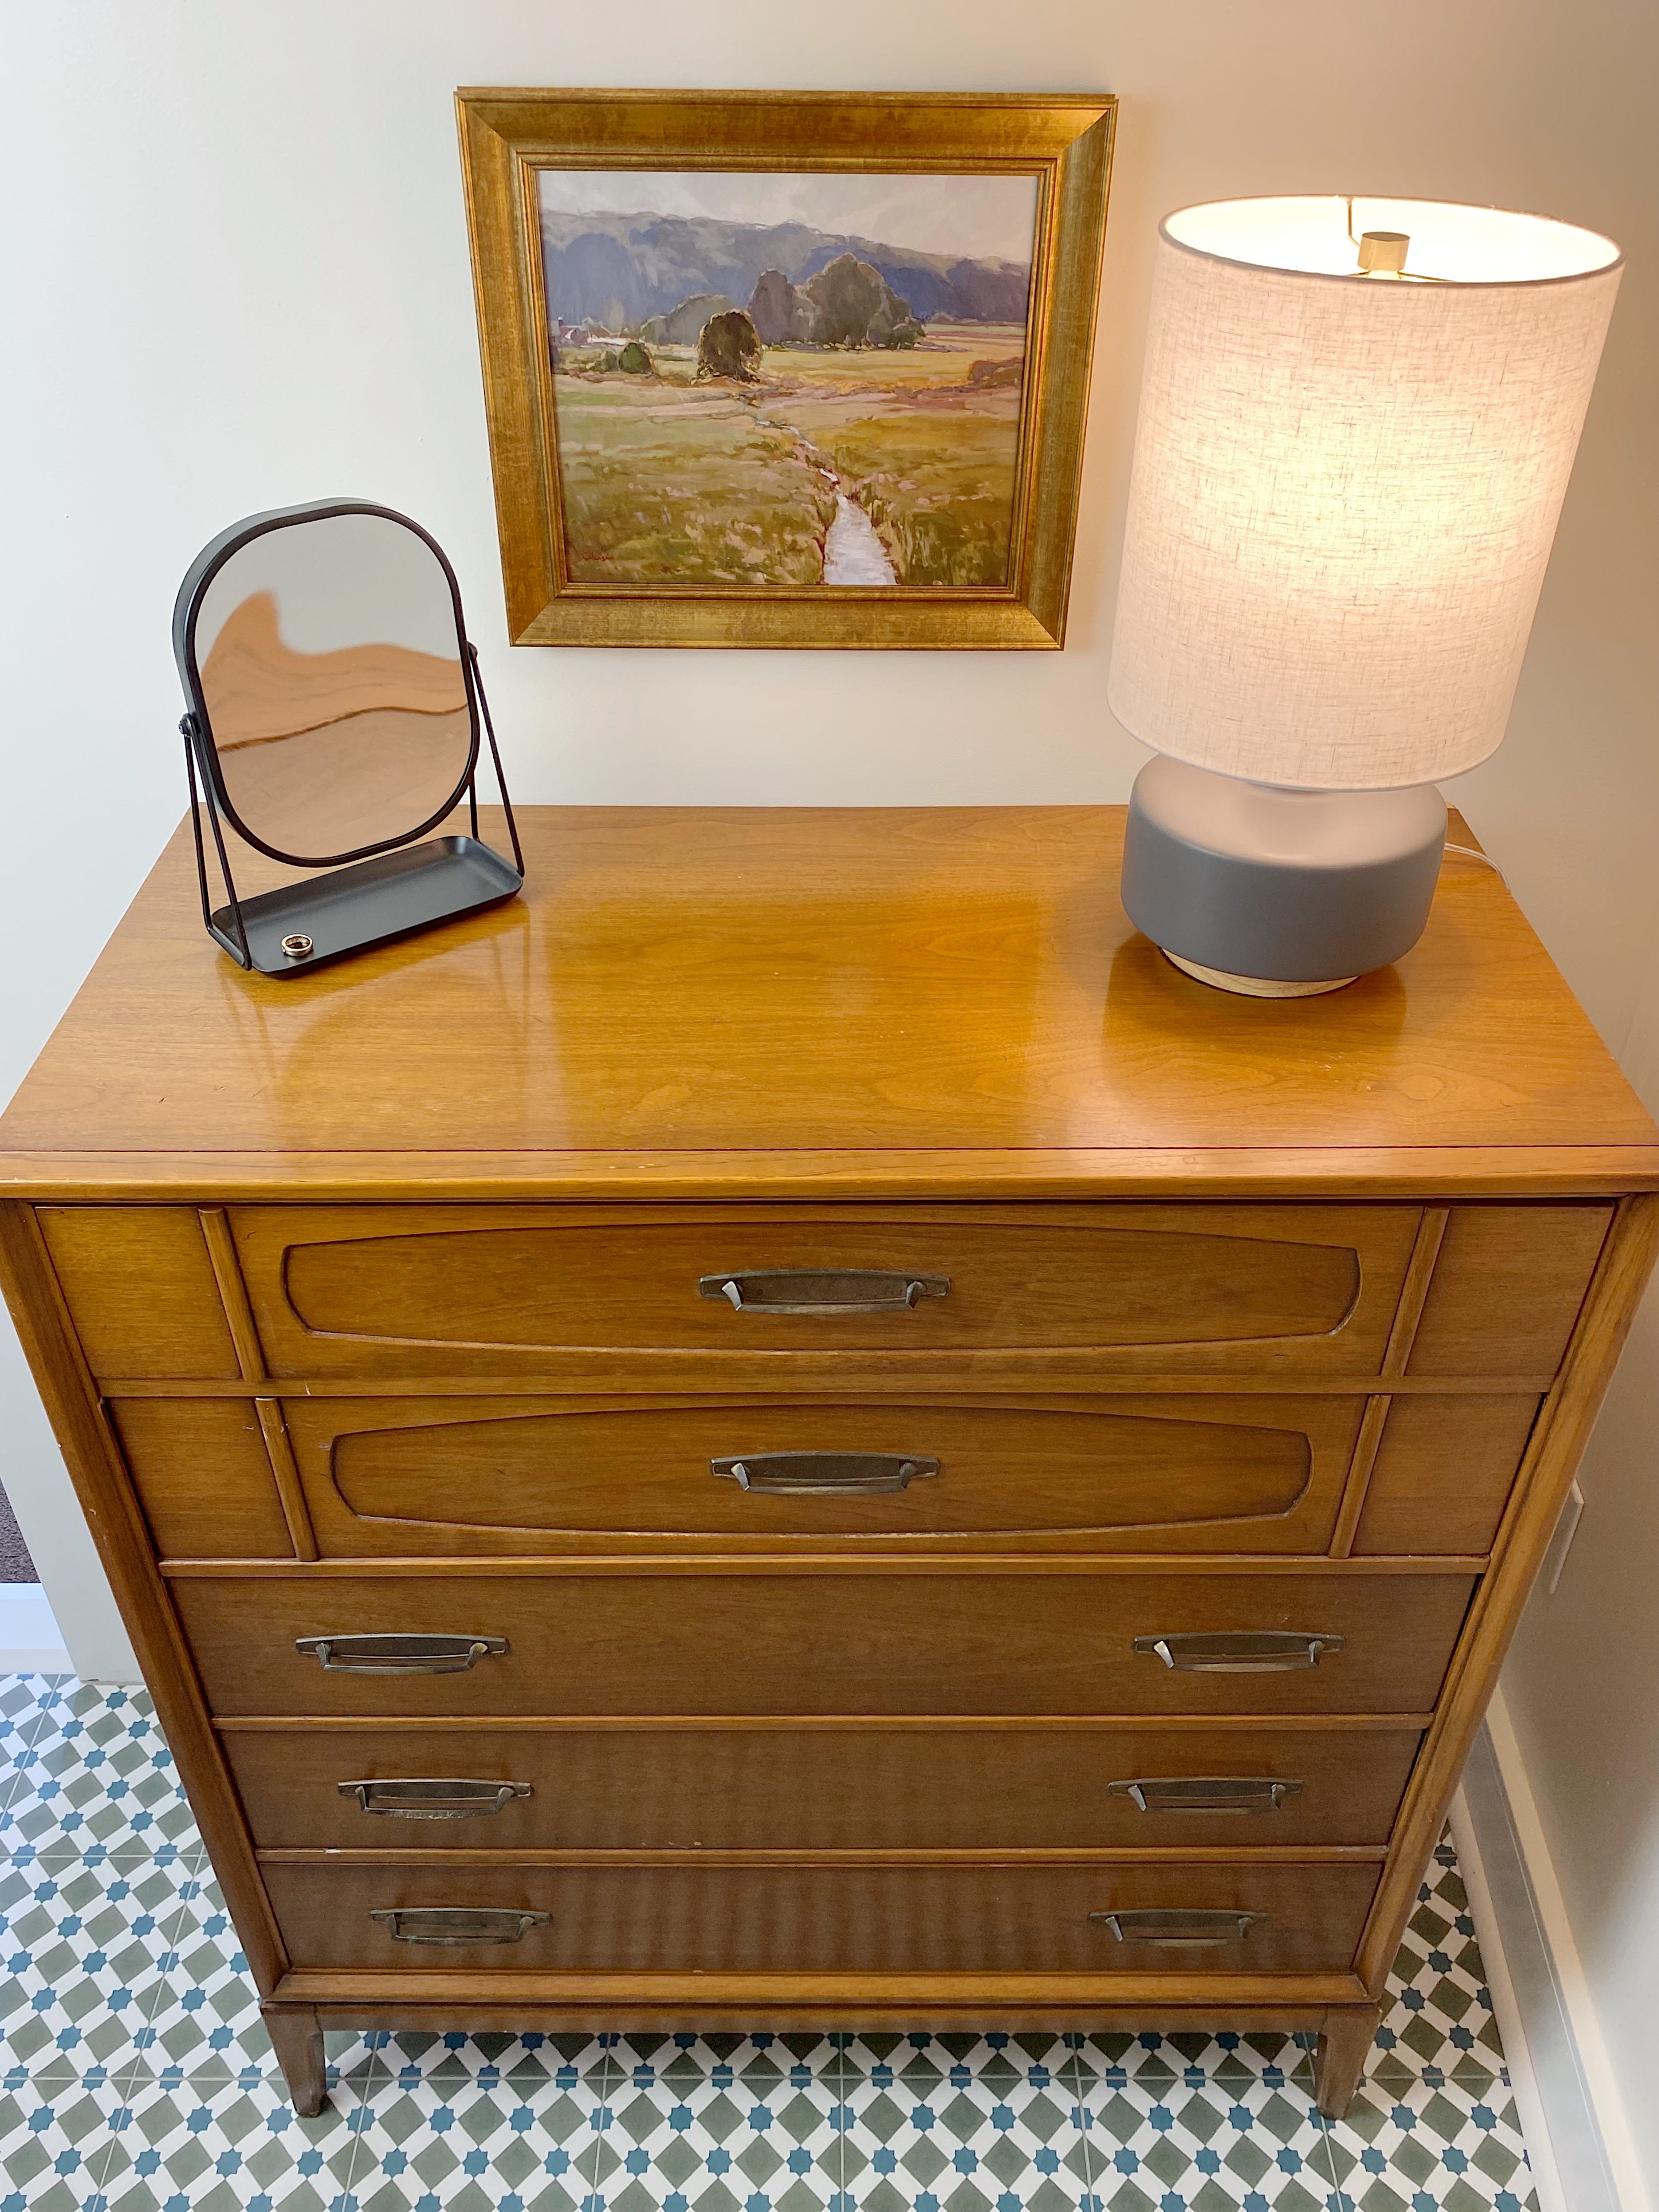 midcentury wood dresser in bathroom with small lamp and wall print and patterned floor tile